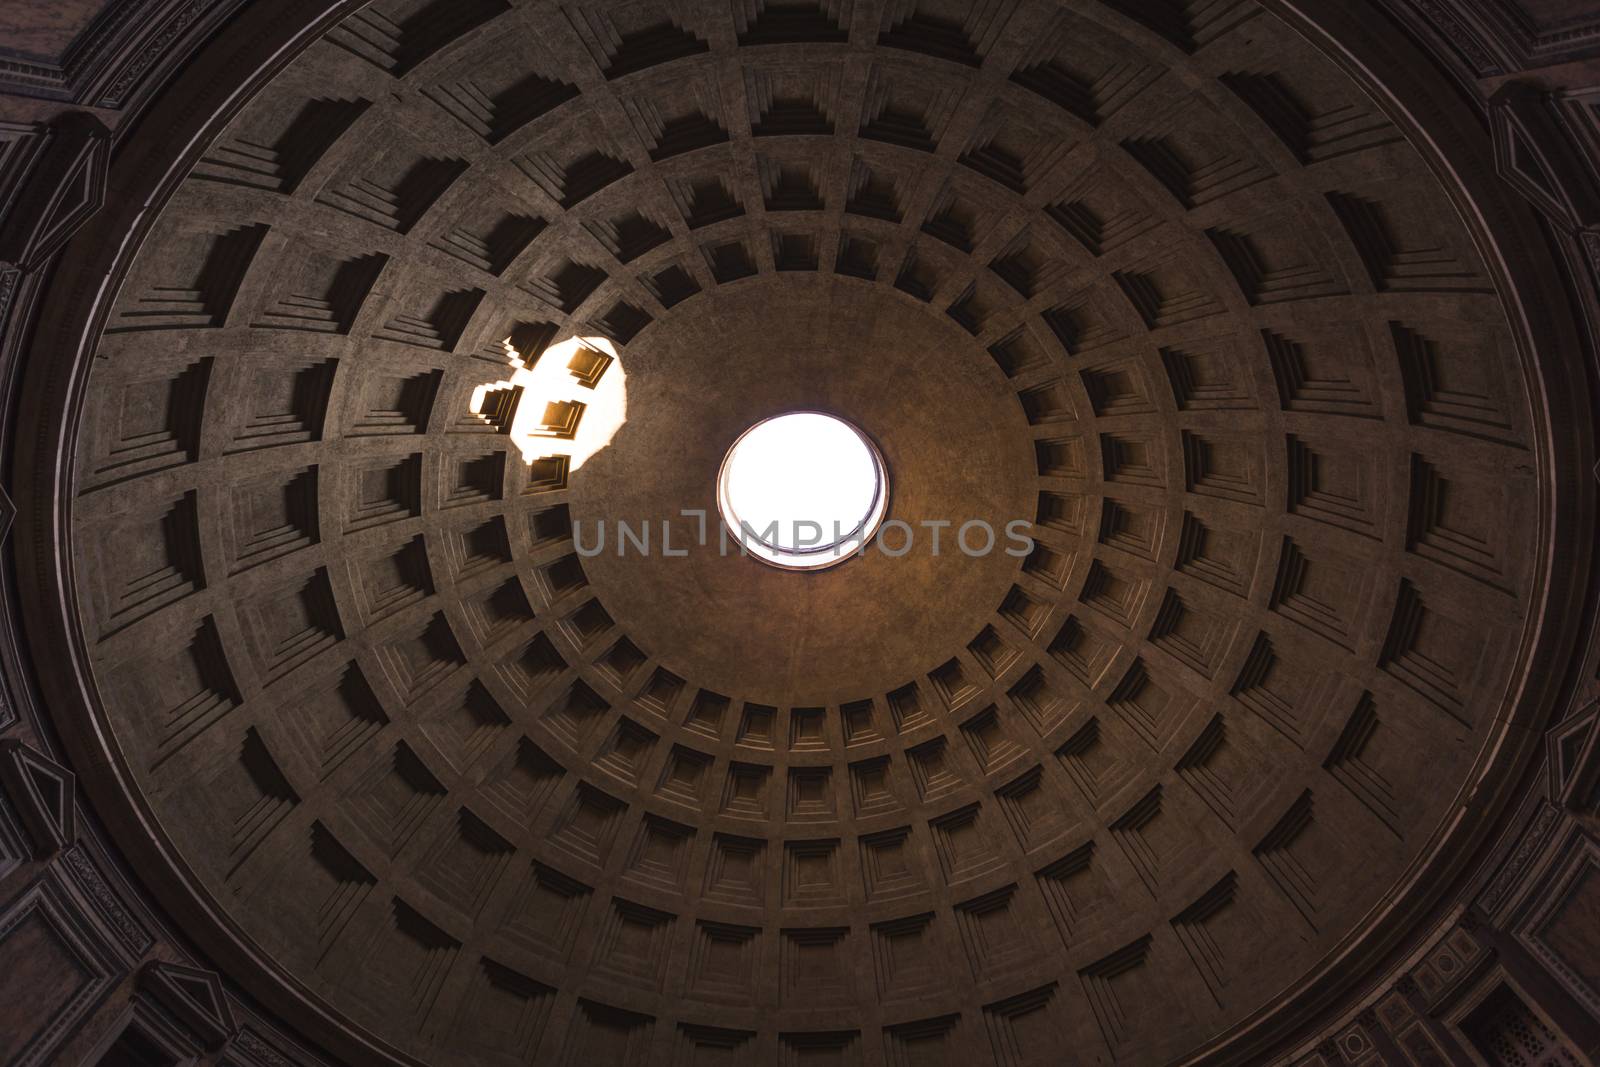 Pantheon dome as seen from inside the Pantheon with a visible light beam coming through the oculus, or open hole. The dome is nearly 2000 years old and the world's largest unreinforced concrete dome.